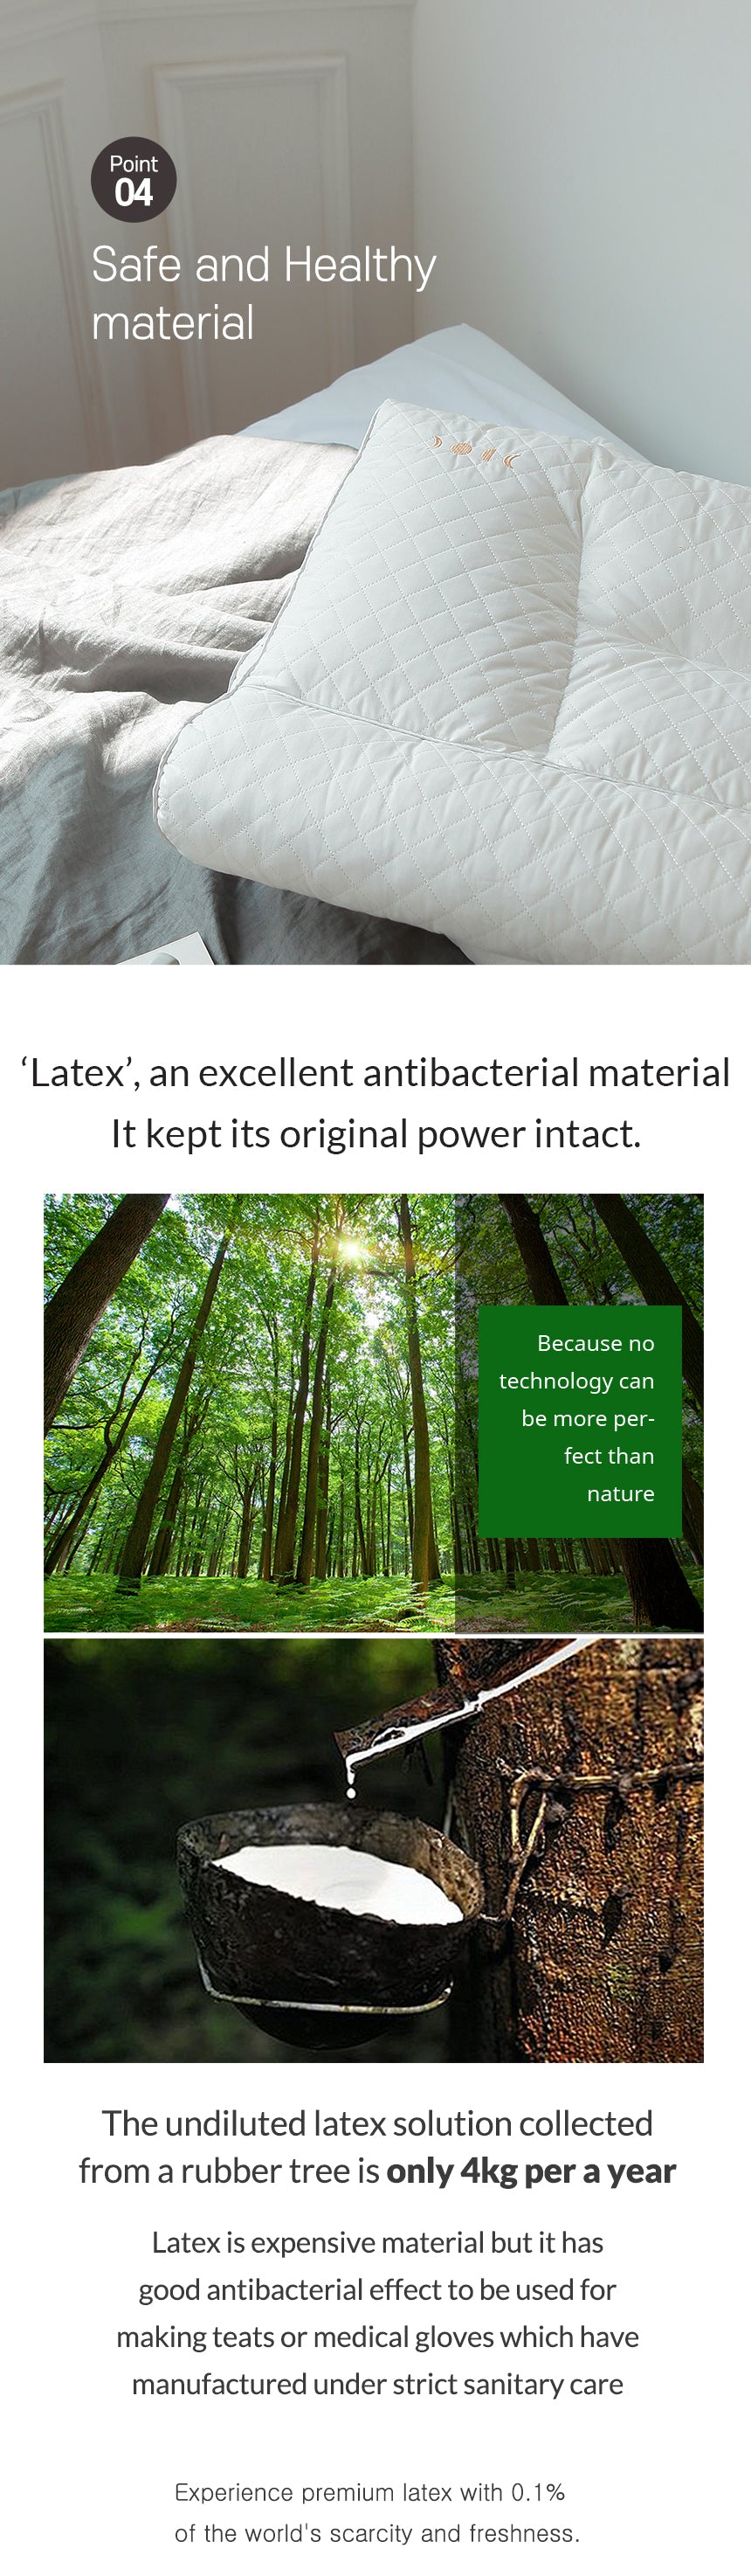 Safe and healthy material - latex an excellent antibacterial material it kept its original power intact.